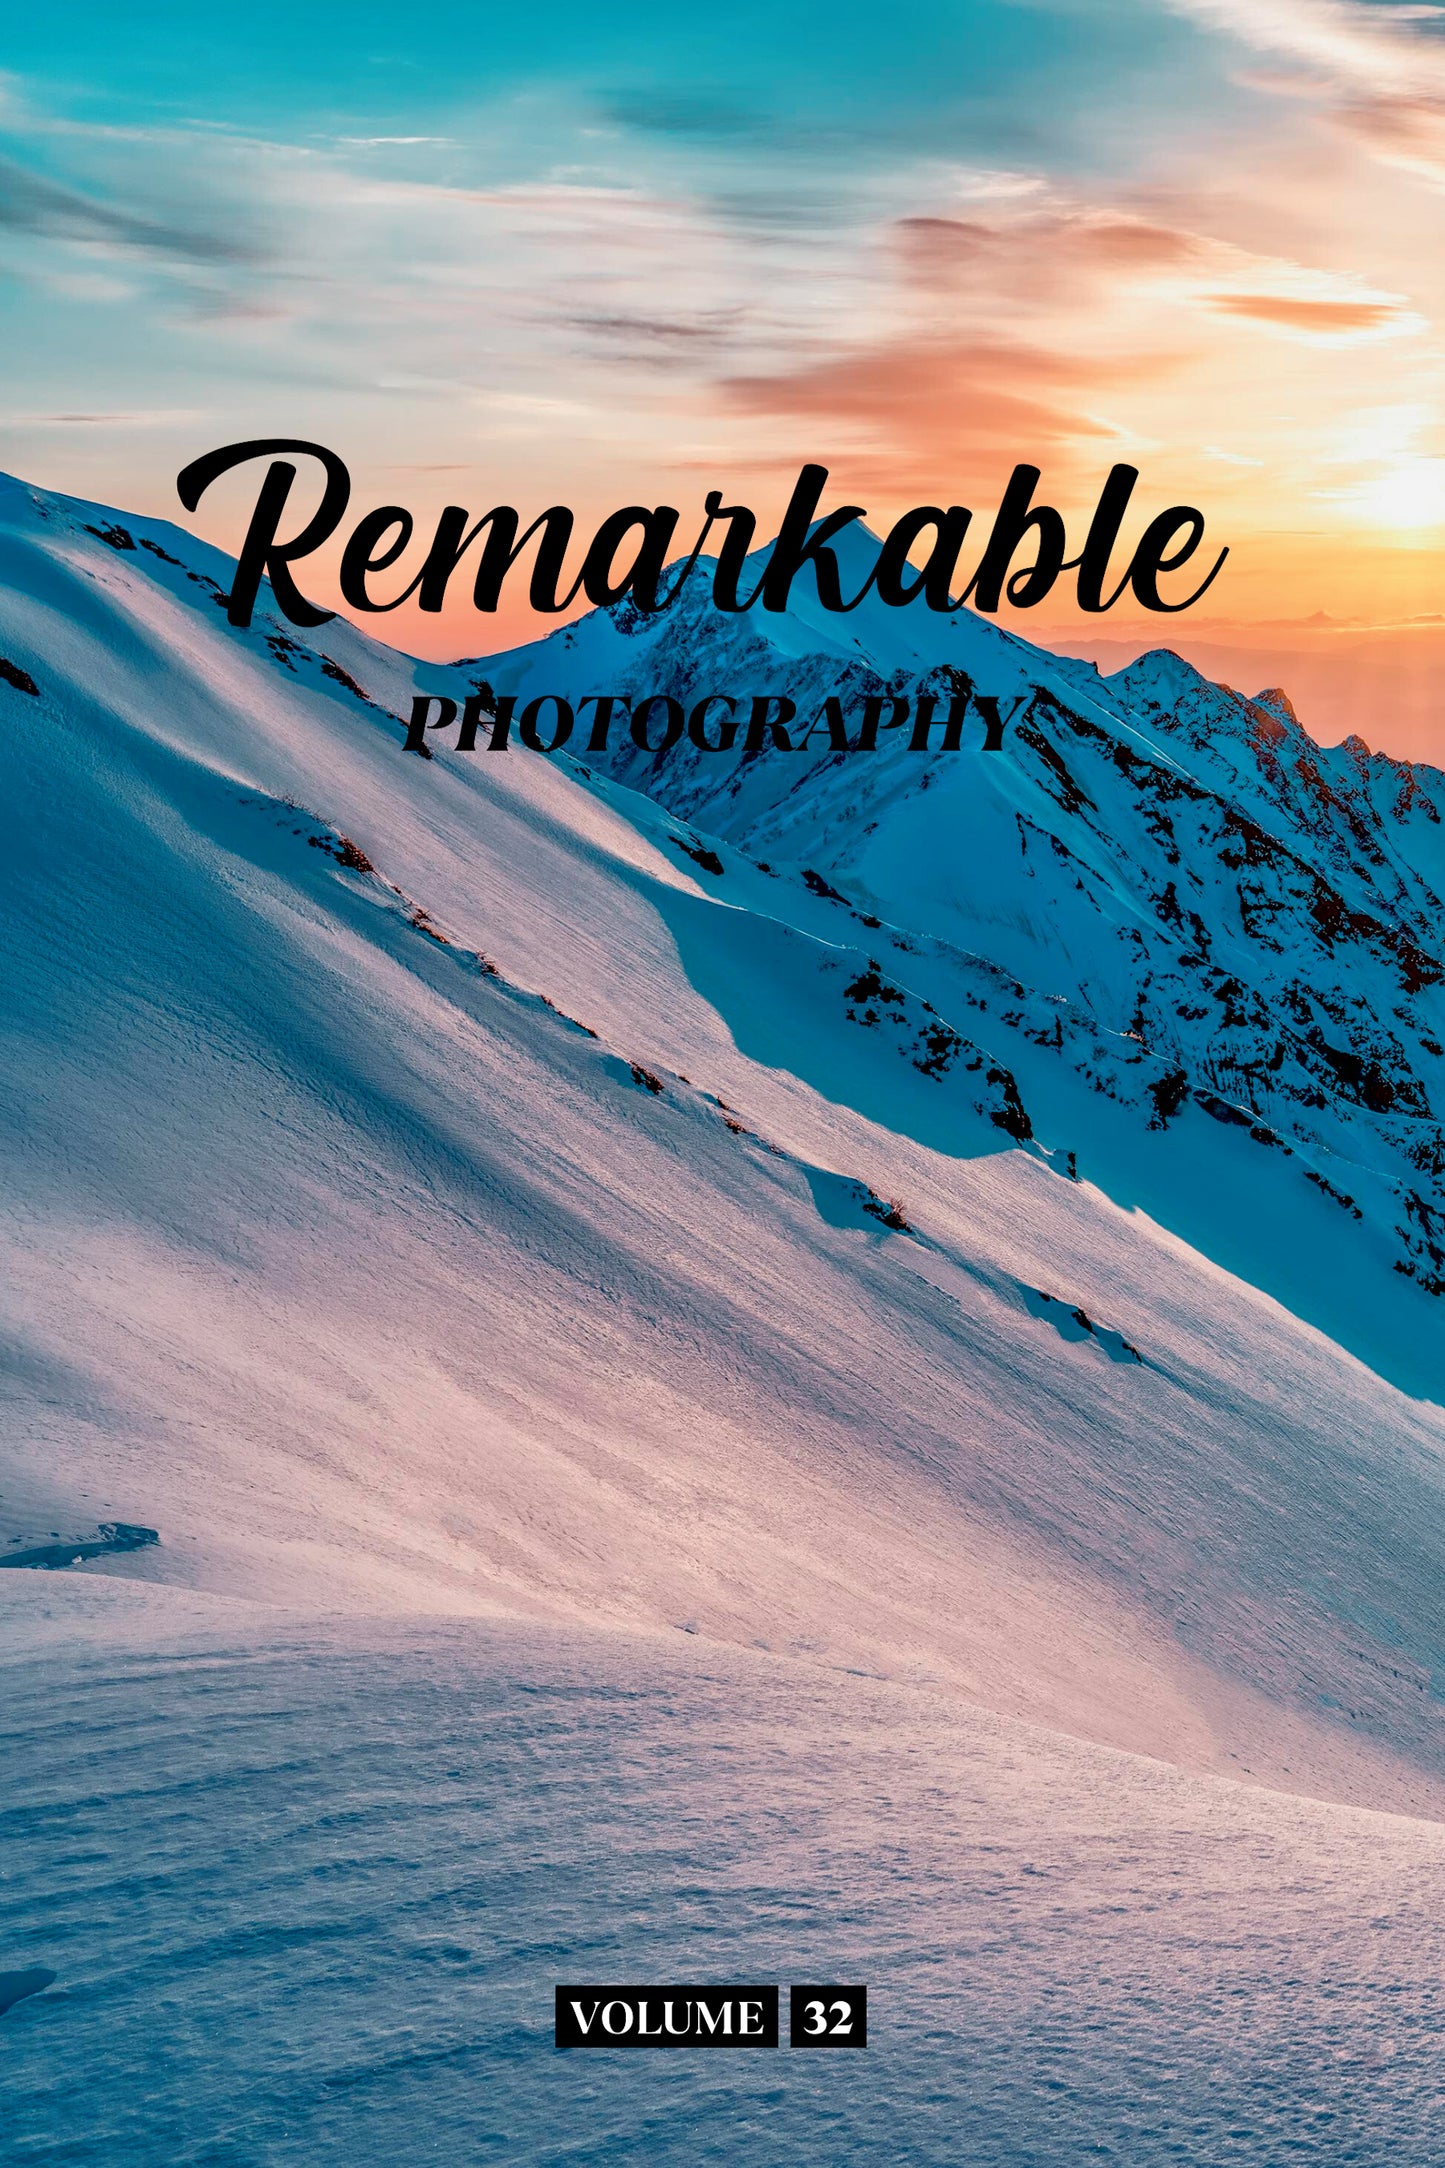 Remarkable Photography Volume 32 (Physical Book Pre-Order)